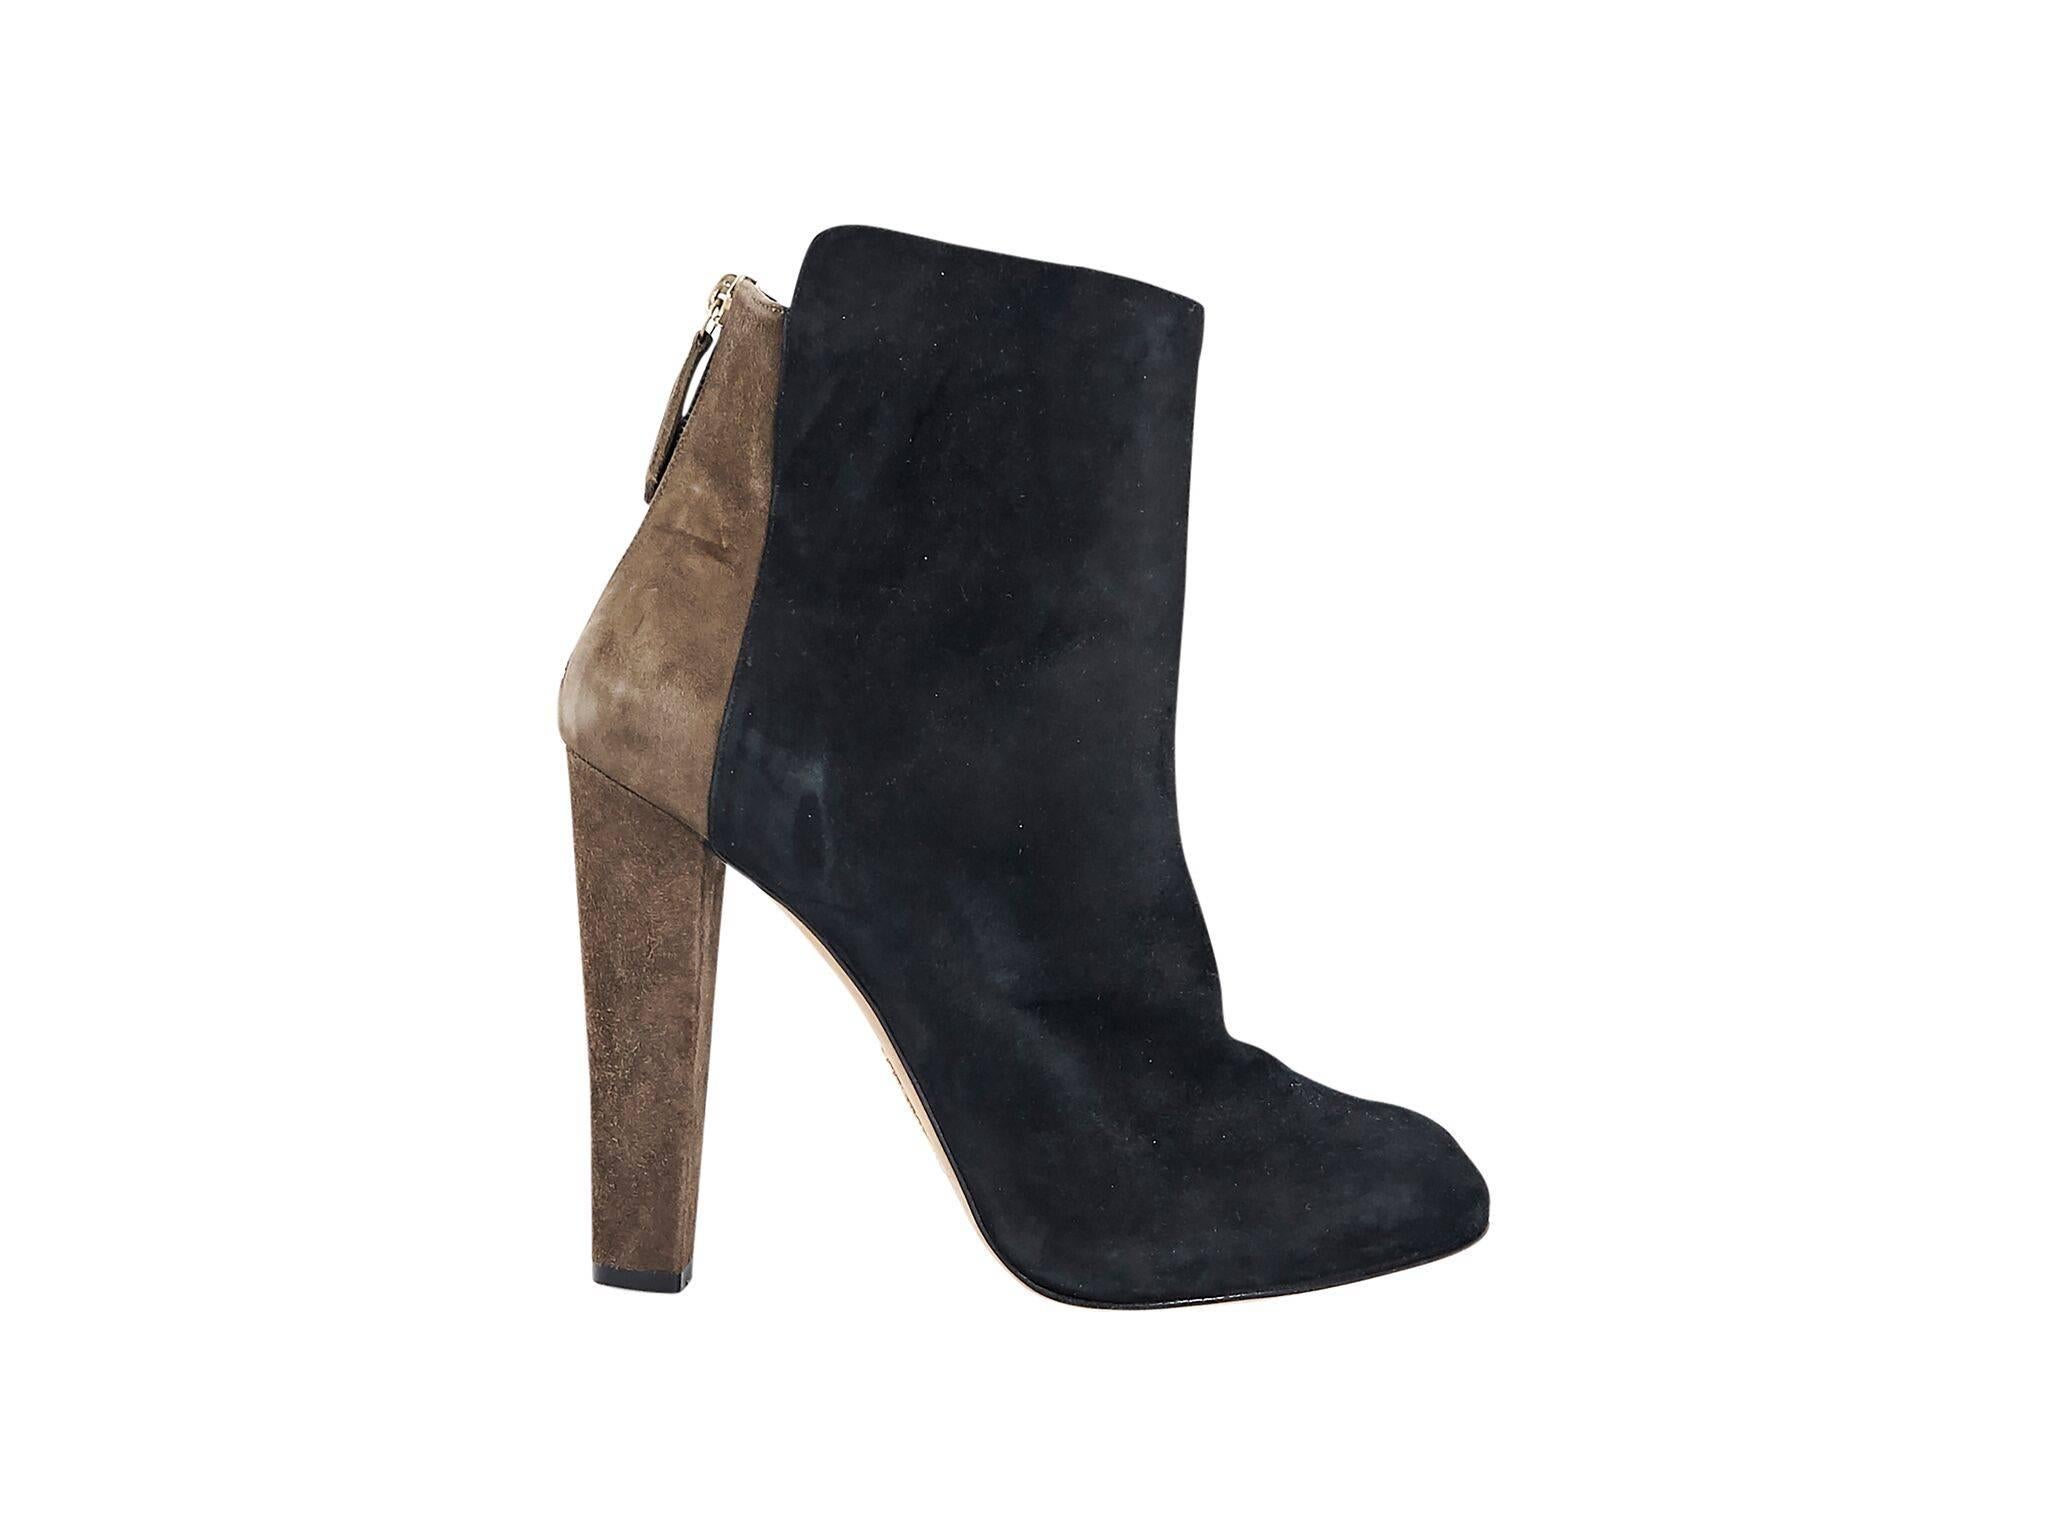 Product details:  Black and brown suede ankle boots by Aquazzura.  Block heel. Round toe.  Back zip closure.  
Condition: Pre-owned. Very good.
Est. Retail $1000